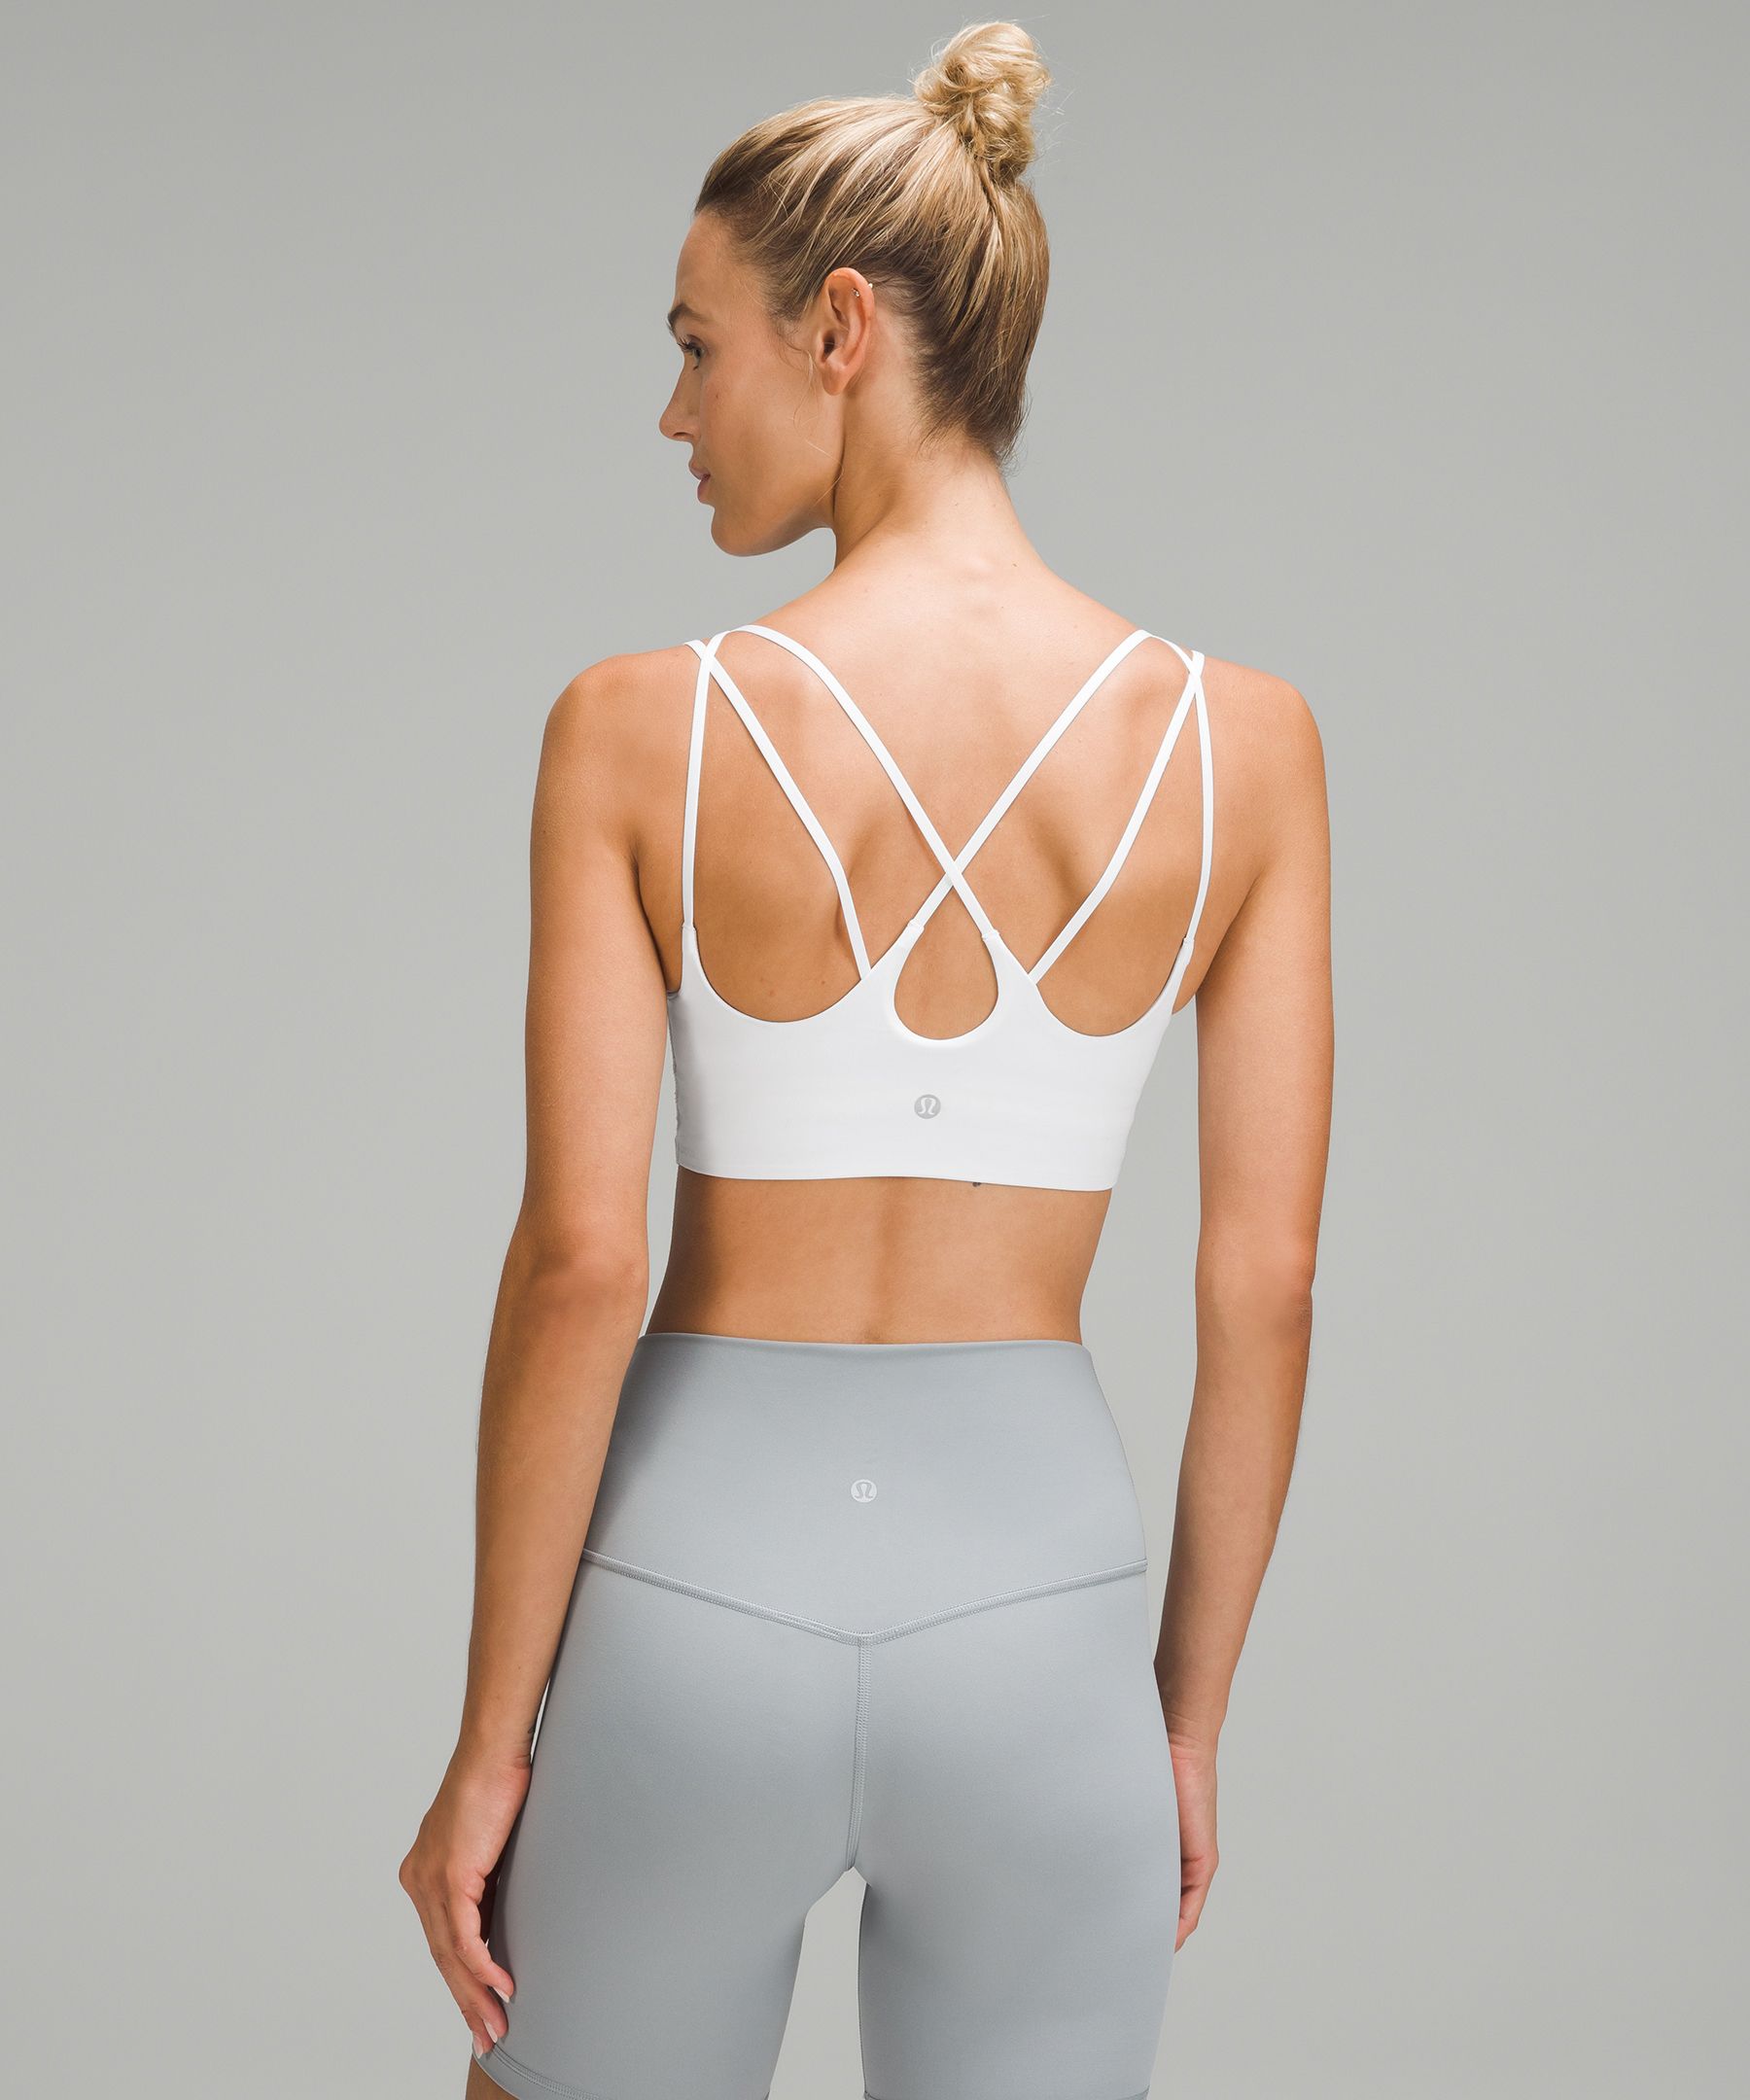 The ribbed nulu strappy yoga bra is soooo comfortable and cute, y'all :  r/lululemon